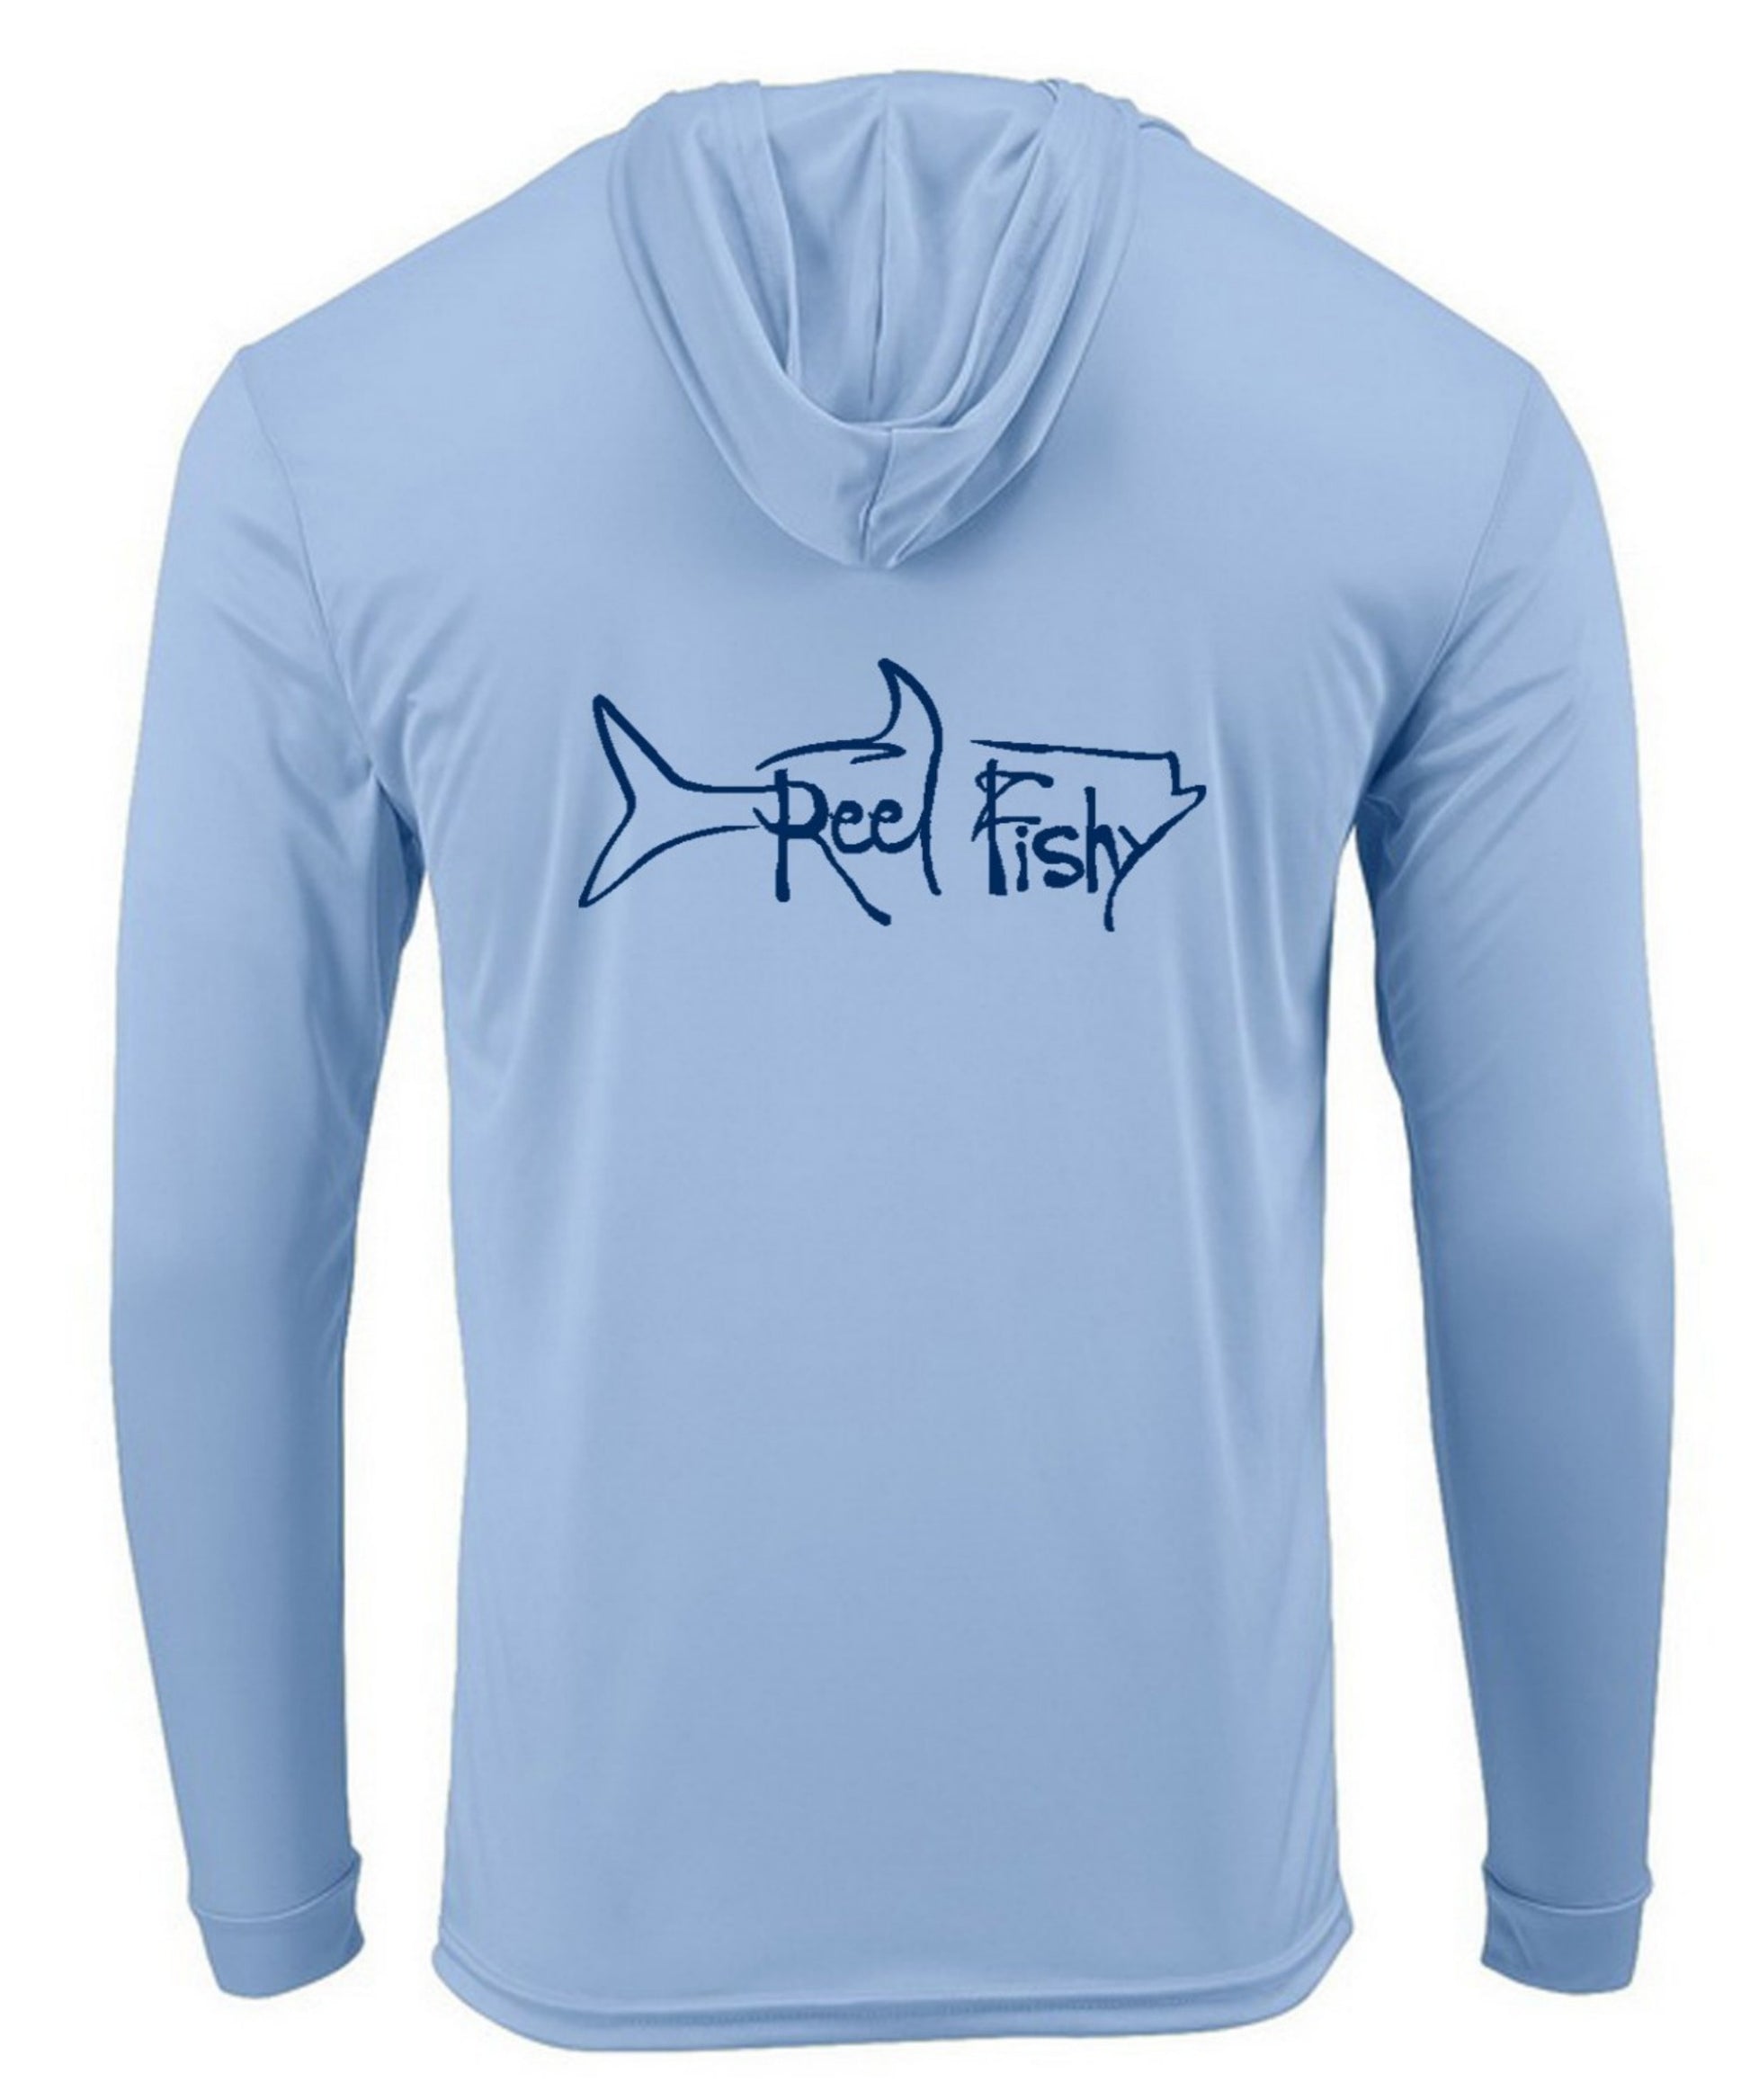 Youth Performance Dry-Fit Tarpon Fishing Shirts 50+Upf Sun Protection - Reel Fishy Apparel S / Pastel Blue S/S